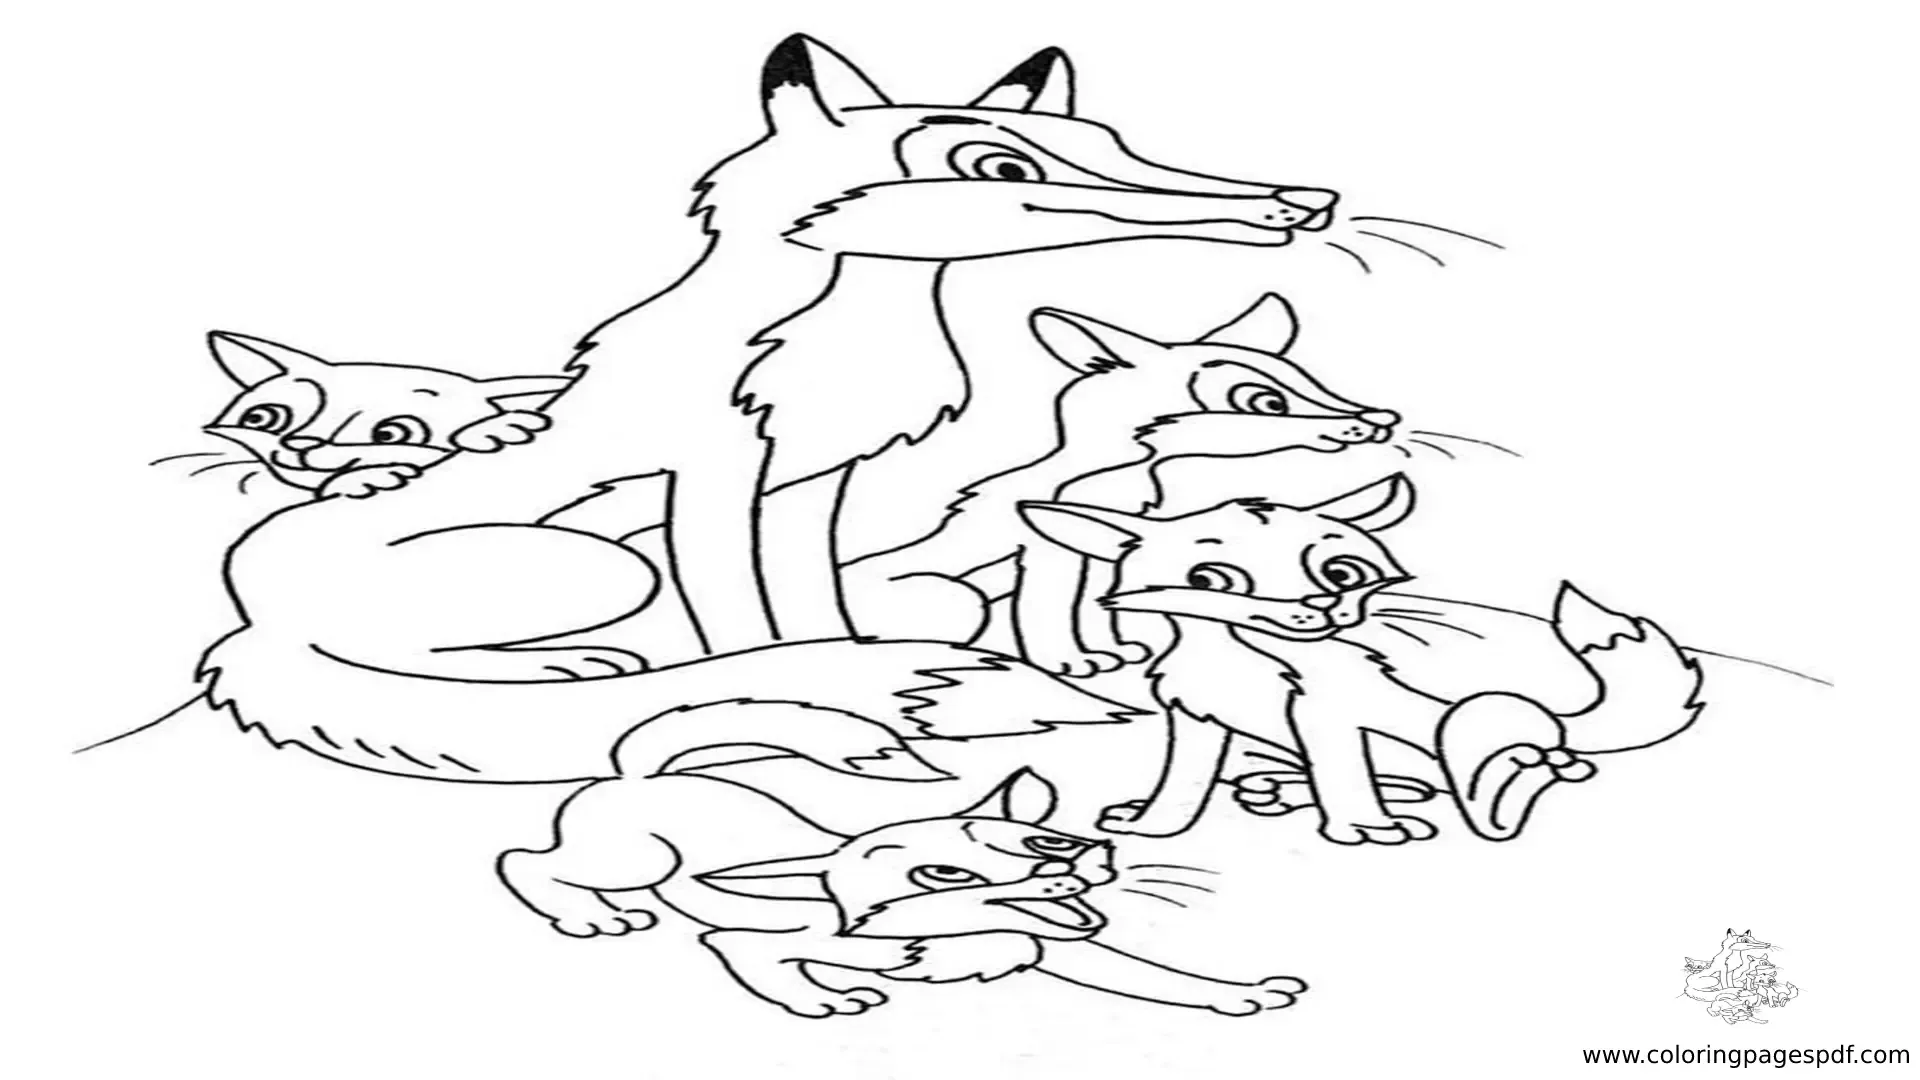 Coloring Pages Of A Mother Fox With Its Babies